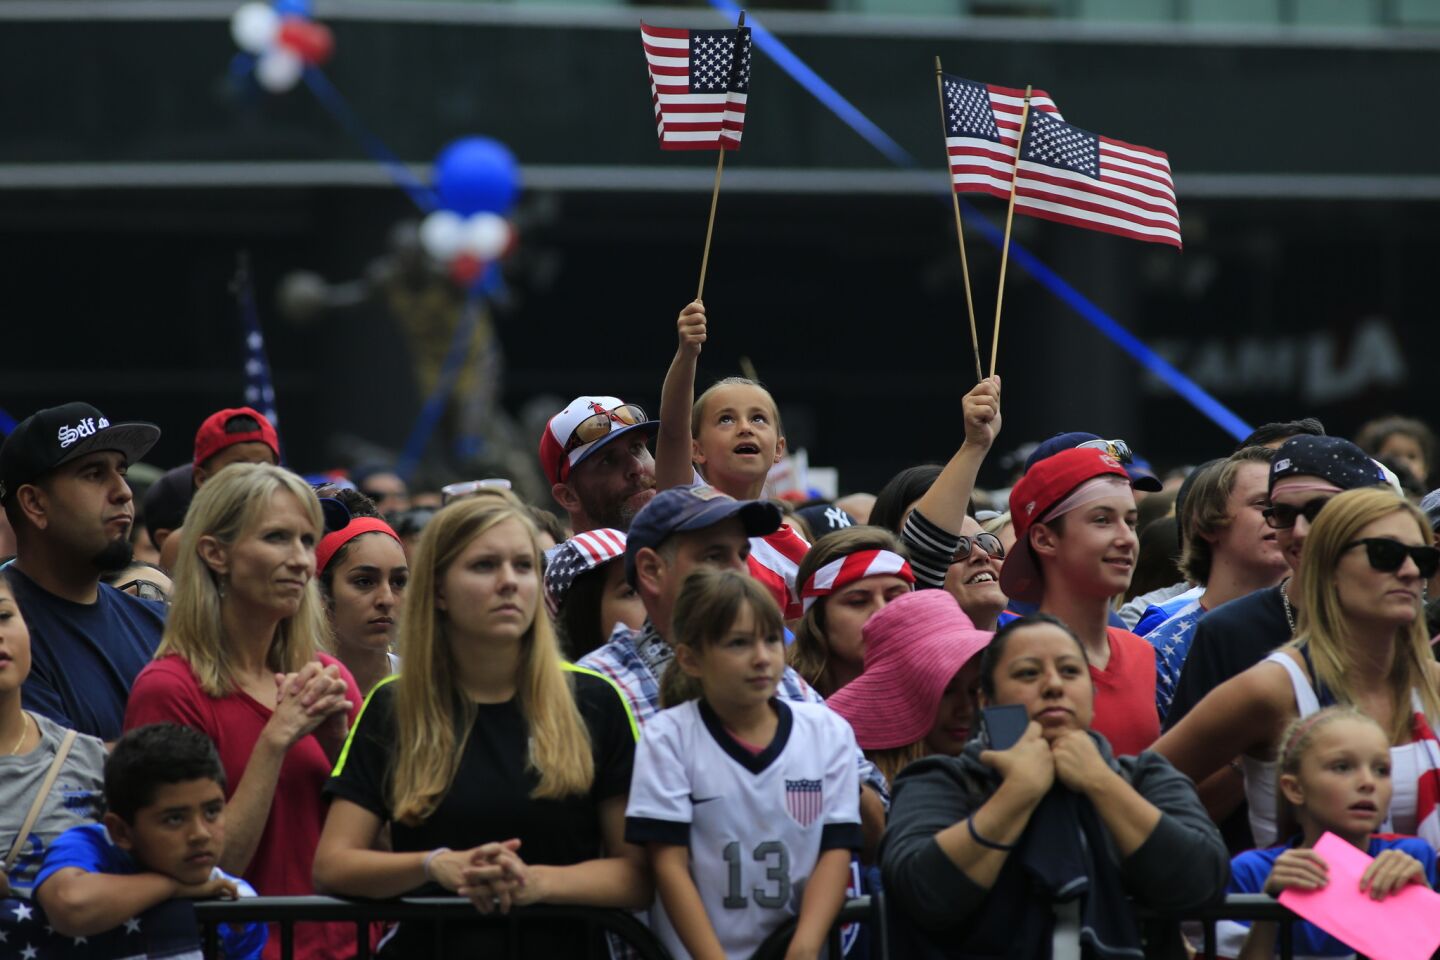 Fans and flags turned out to honor the U.S. women's national soccer team.